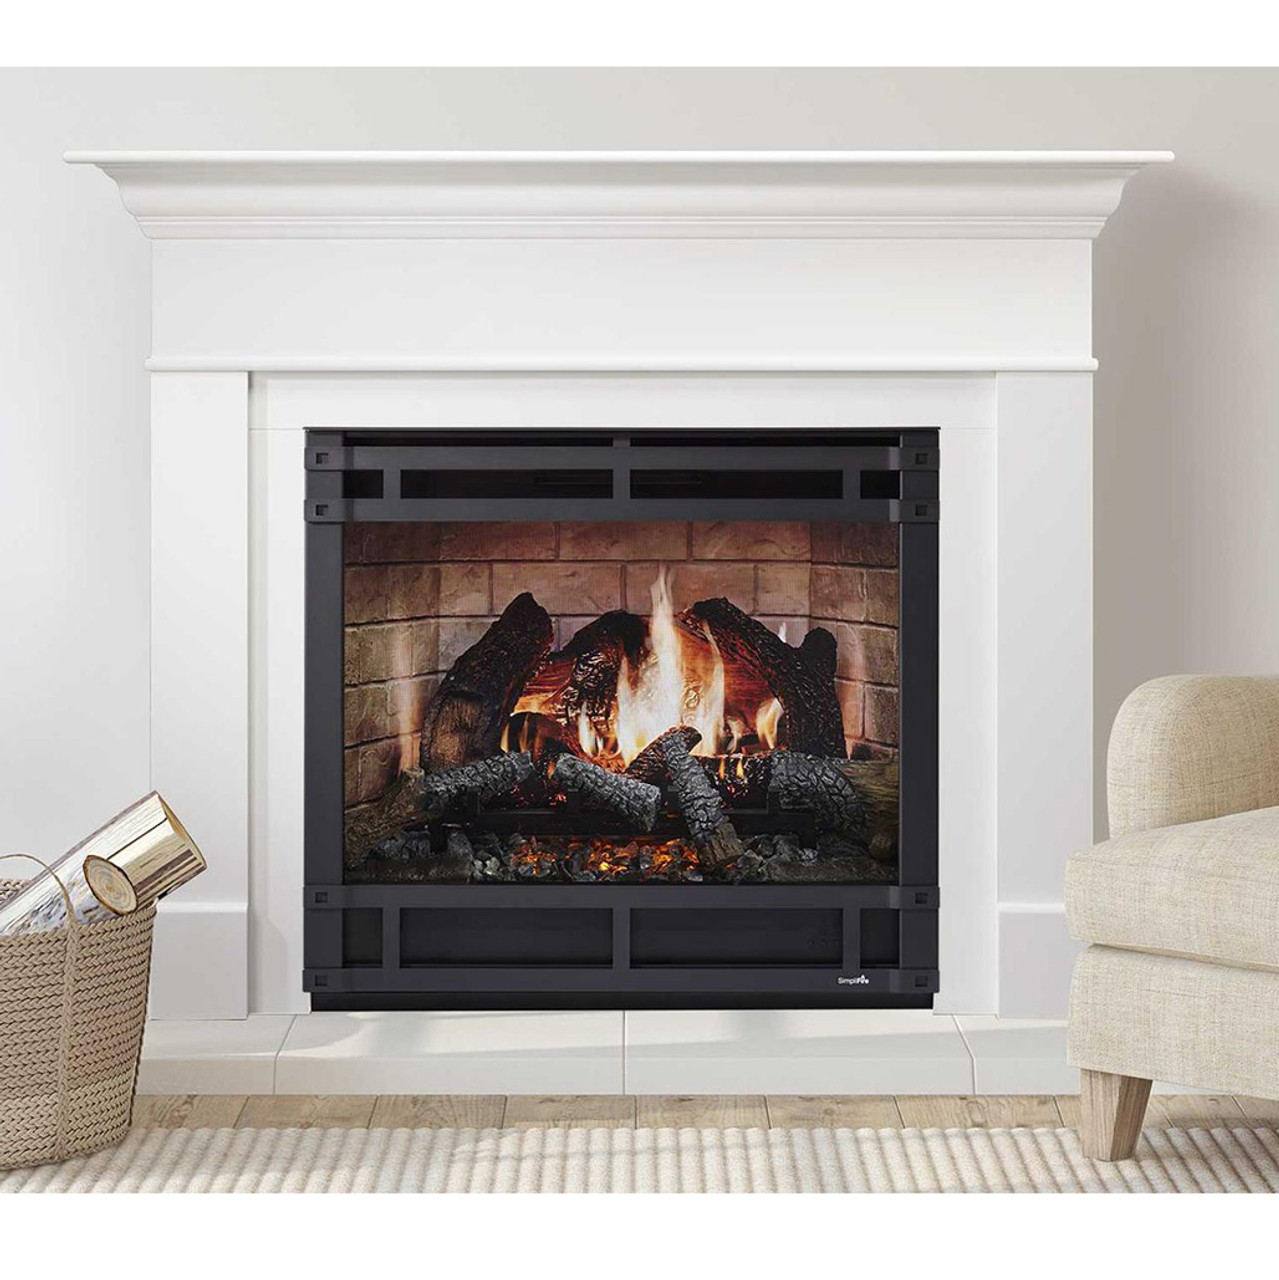 Can Electric Fireplaces Heat A Room